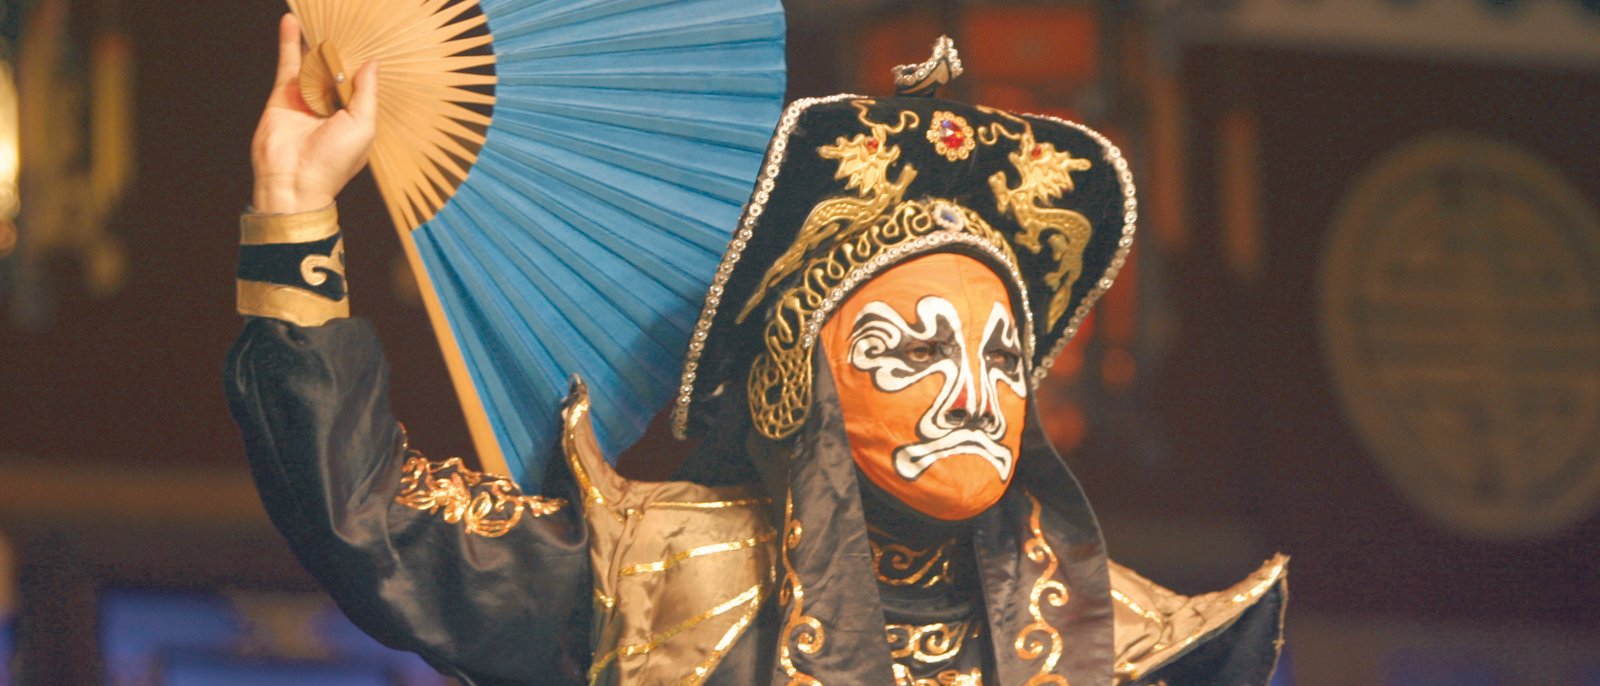 Traditional Chinese Opera masked actor. Shot this at a Chinese Opera in Chengdu, China.